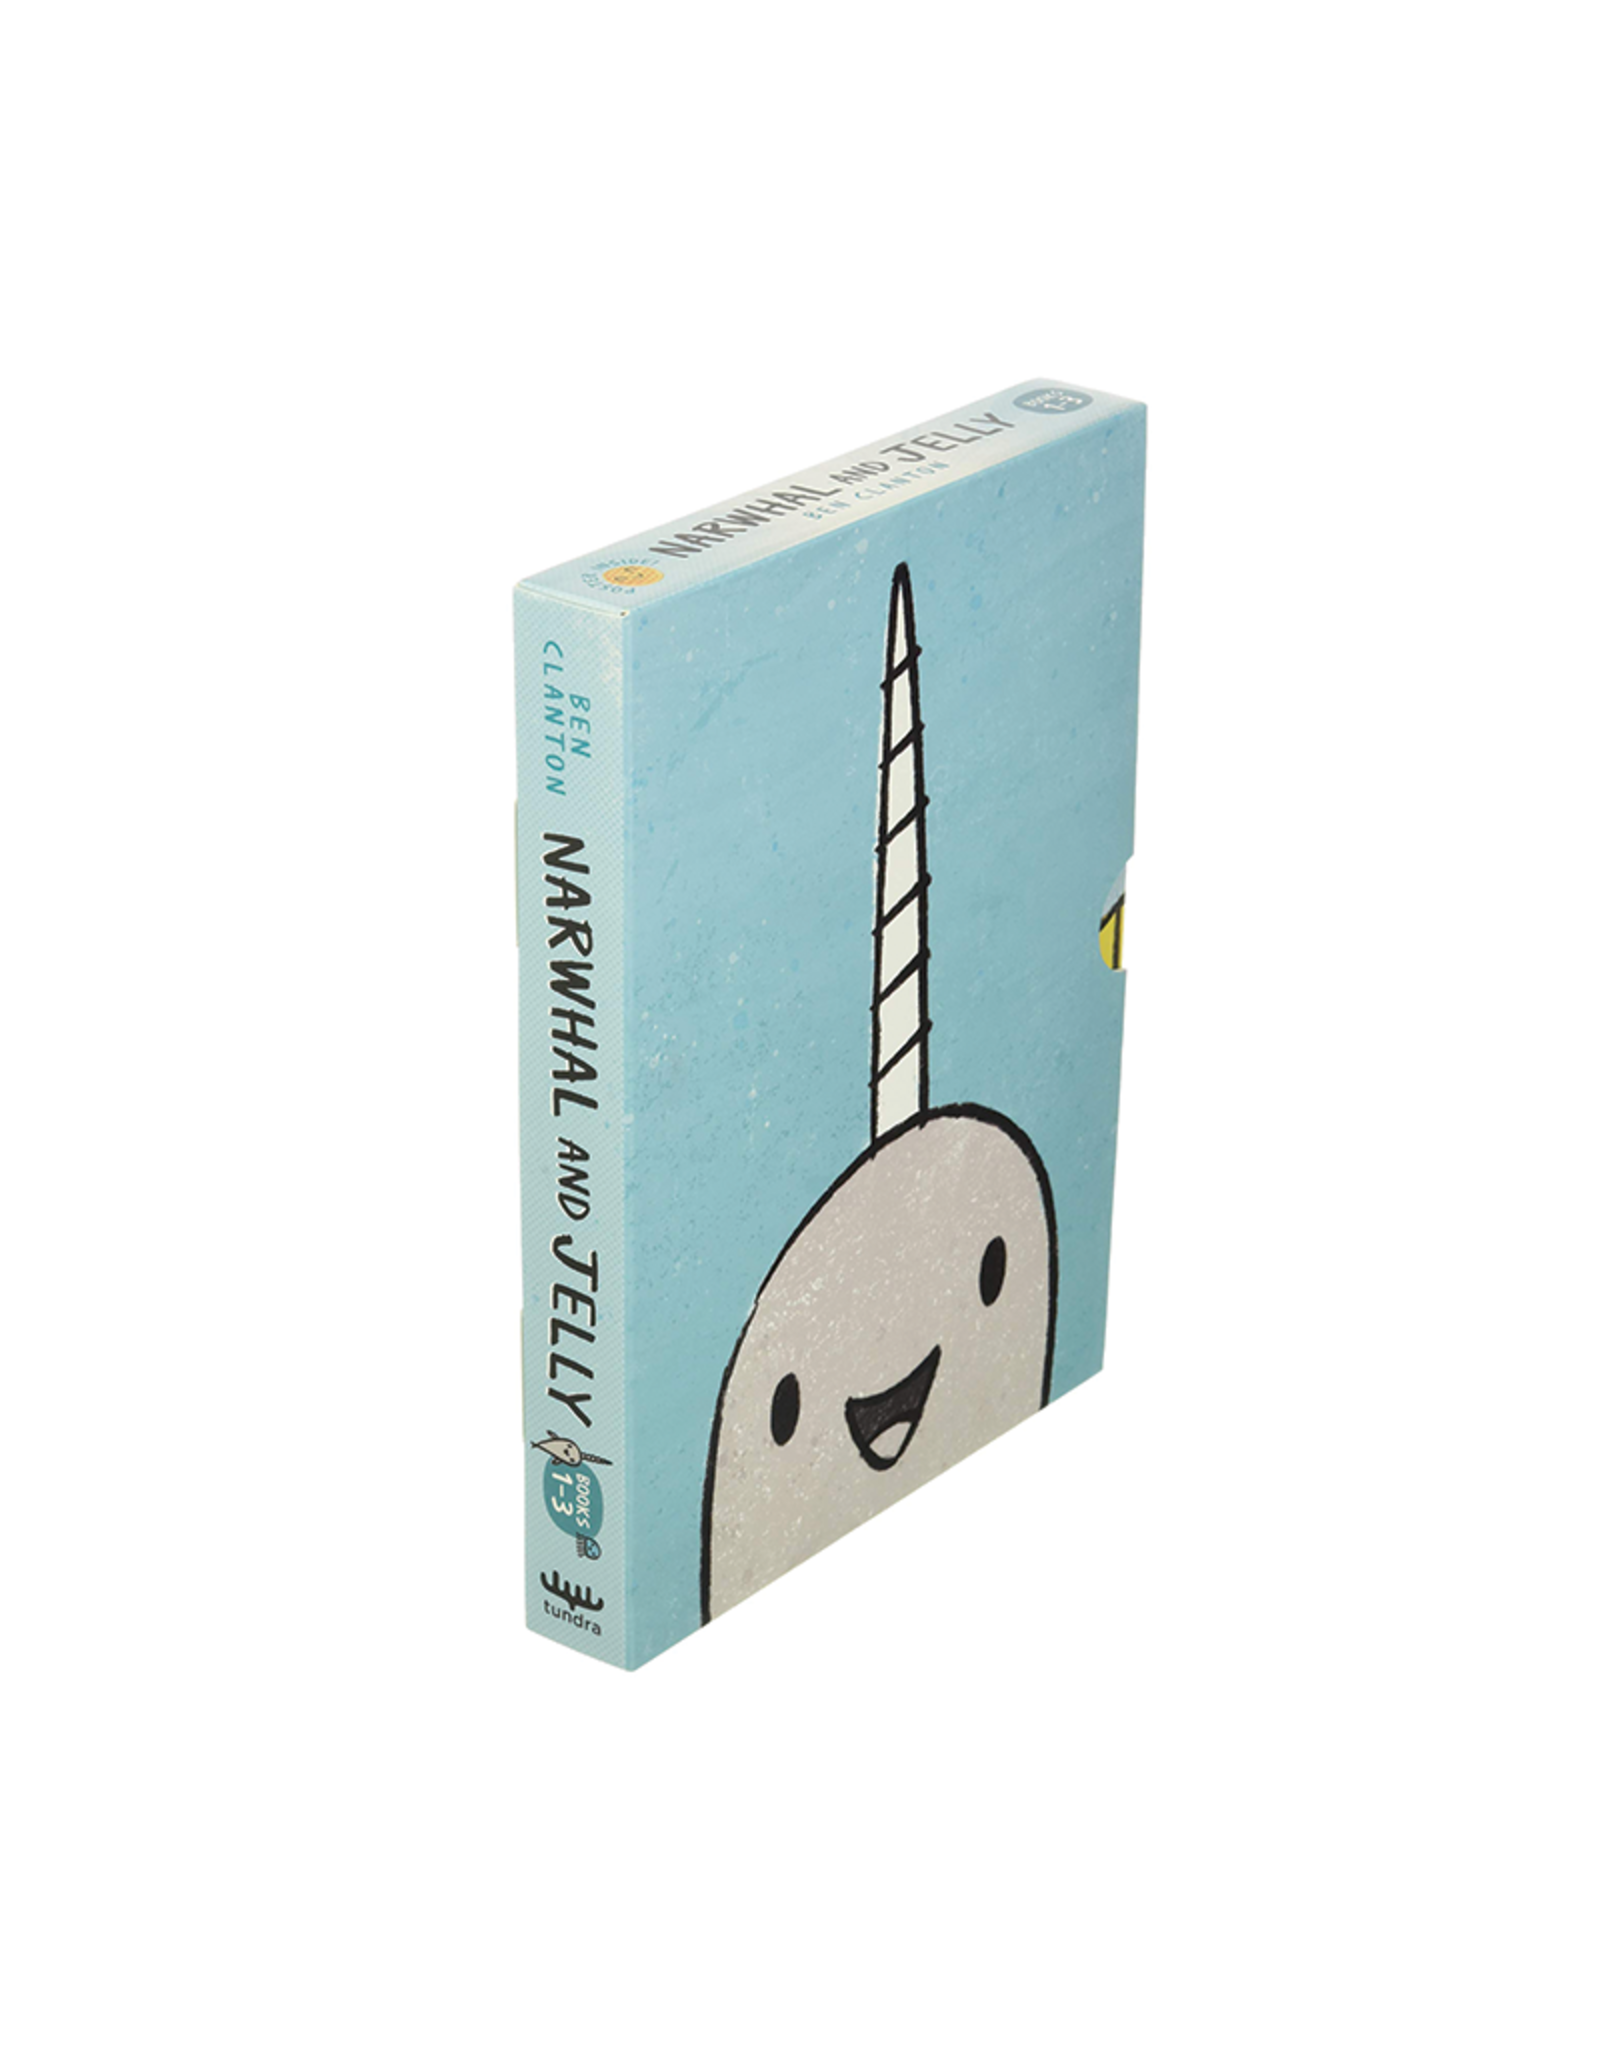 narwhal and jelly book 5